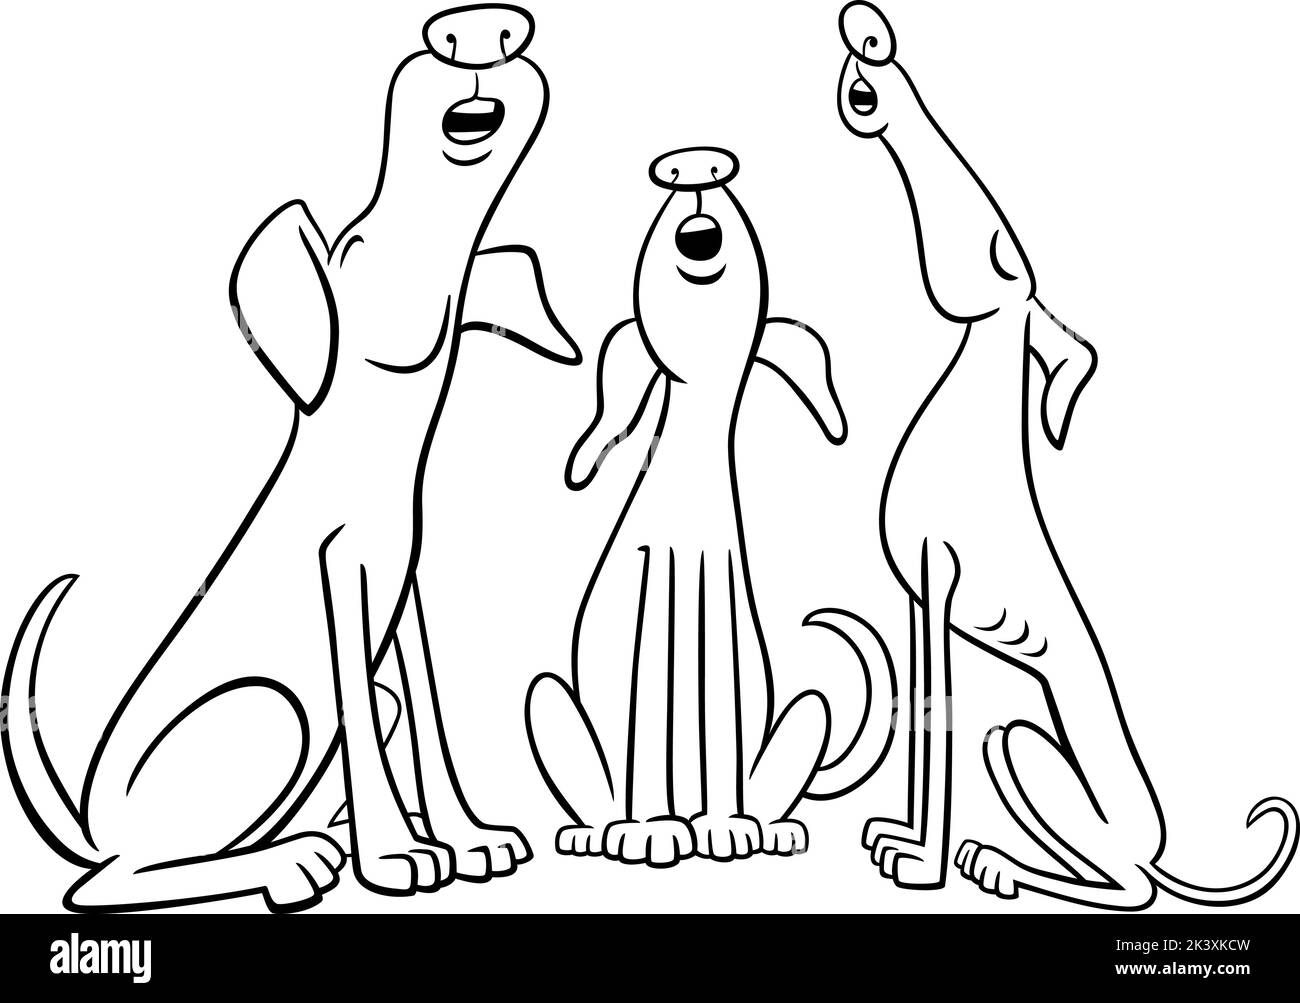 Black and white cartoon illustration of three dogs animal characters howling or barking coloring page Stock Vector